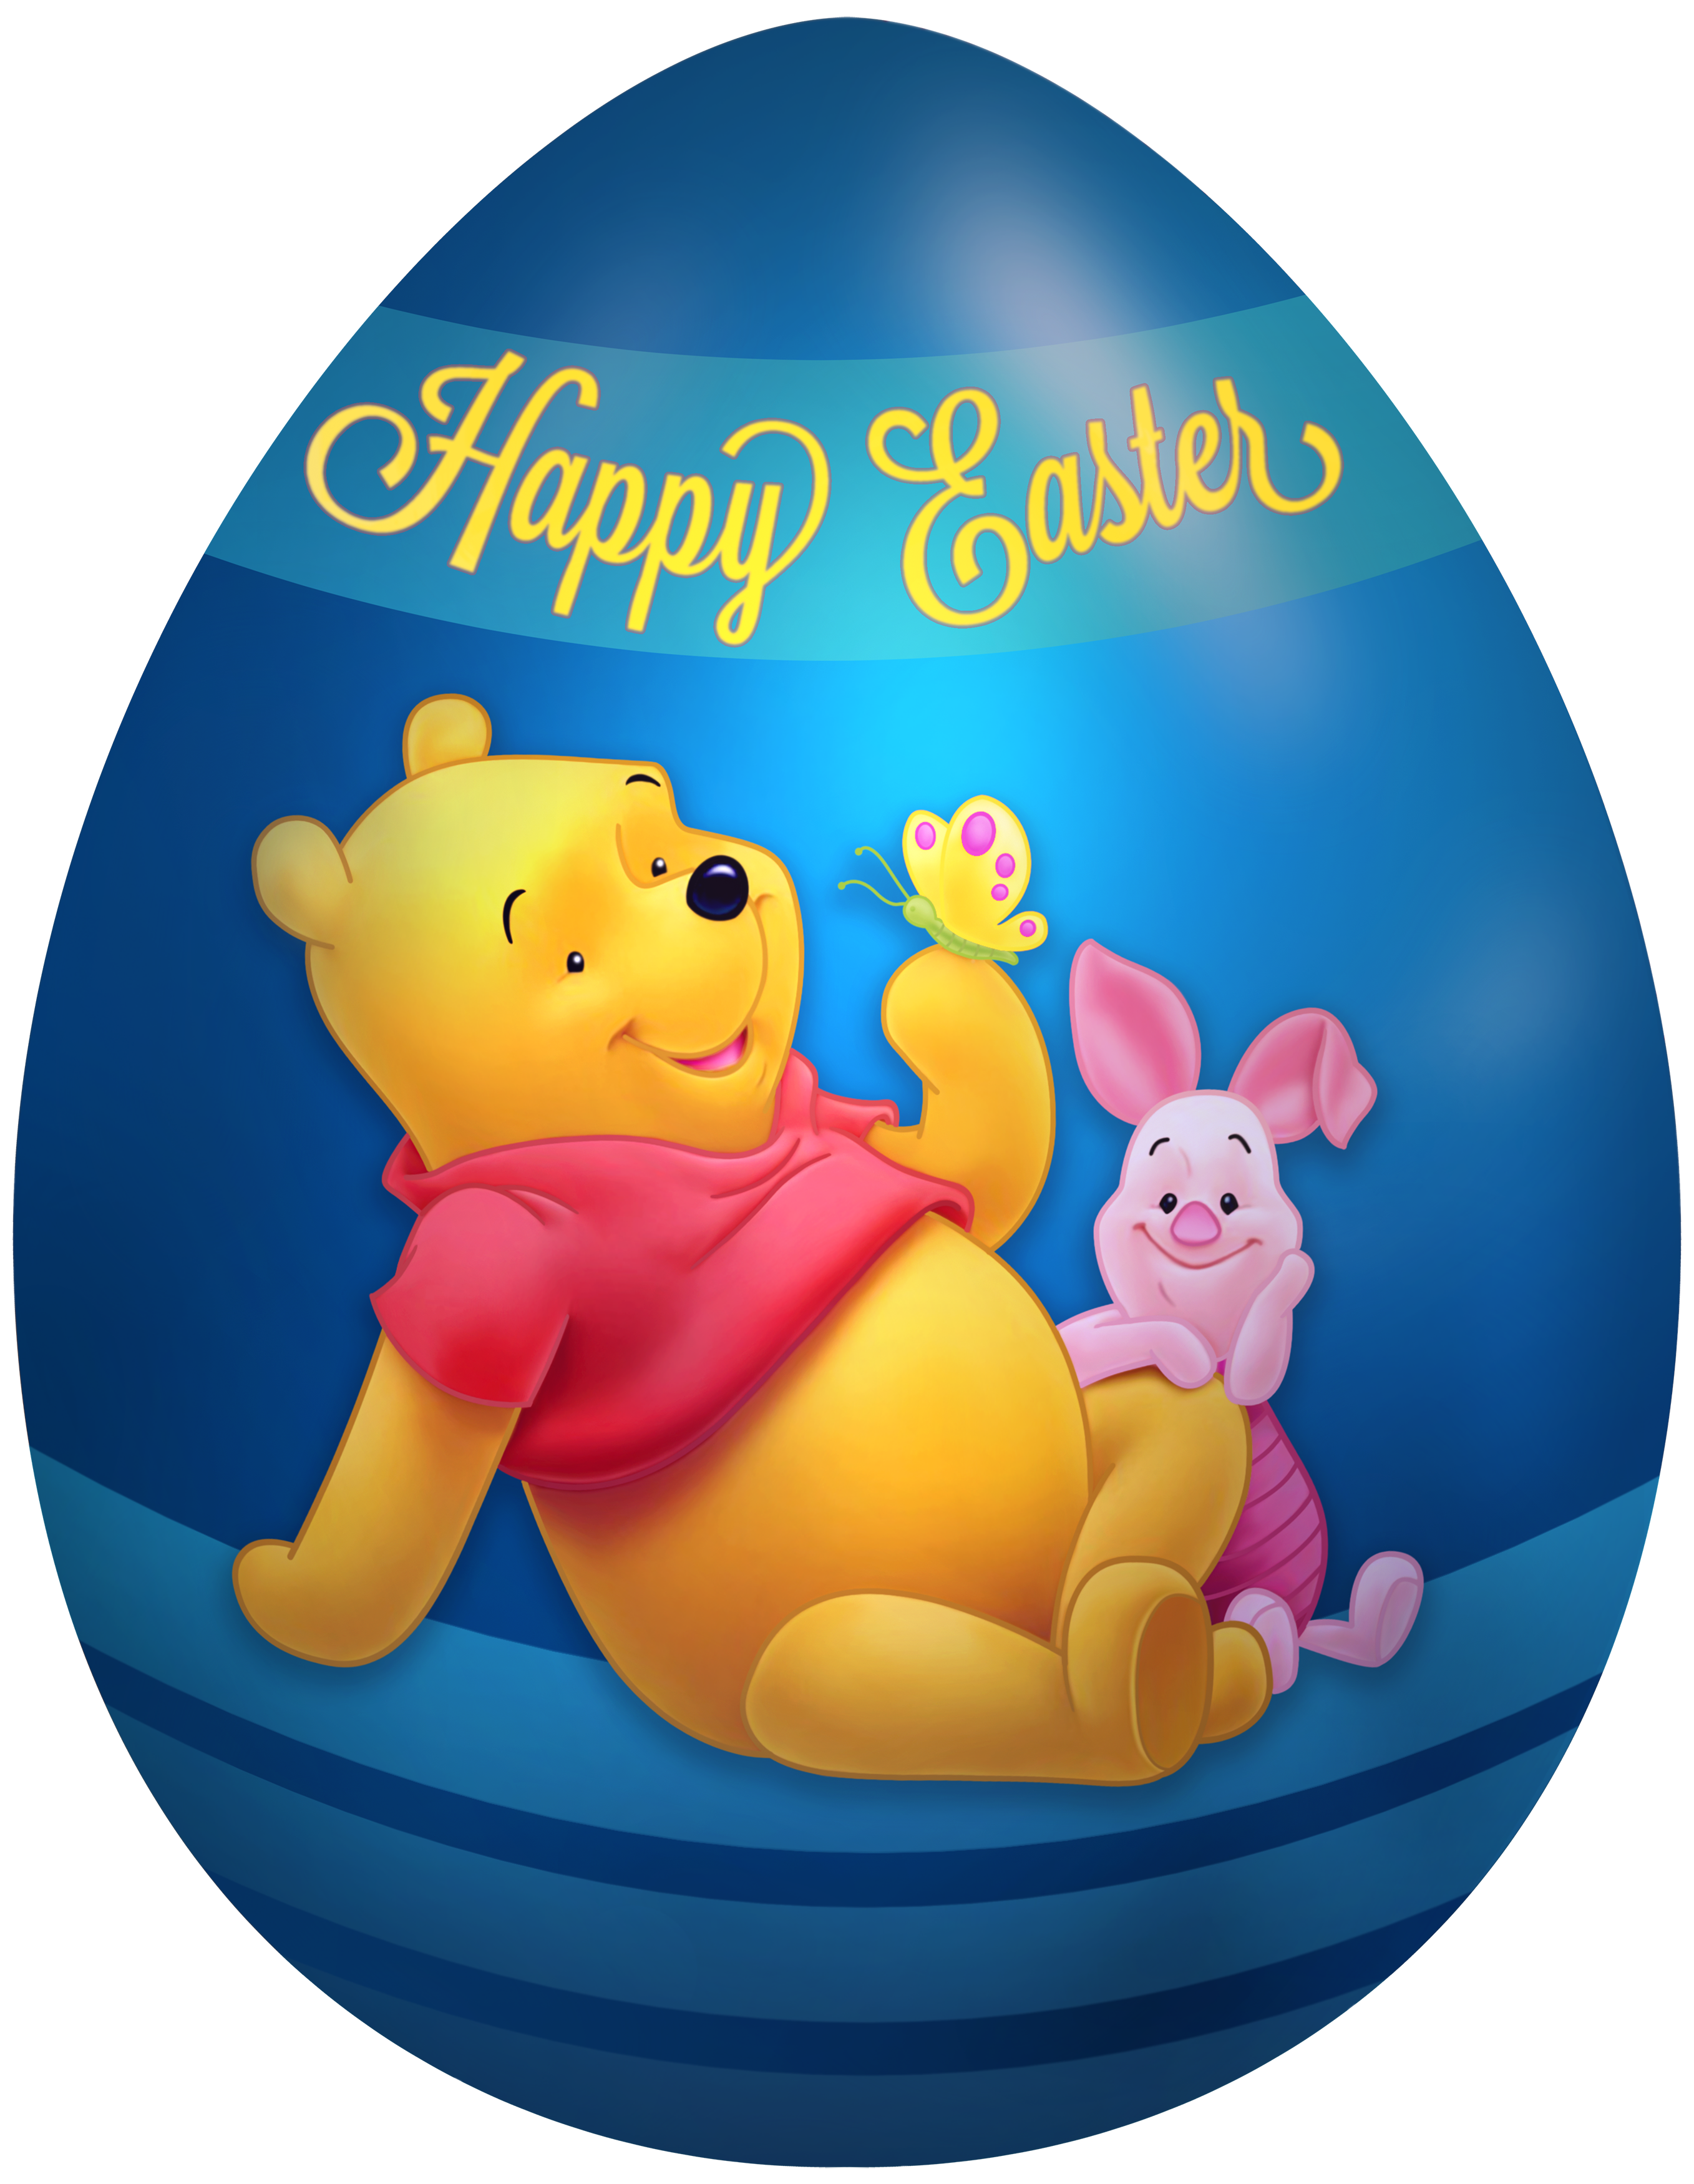 2715x3500 Kids Easter Egg Winnie The Pooh And Piglet Png Clip Art Image.